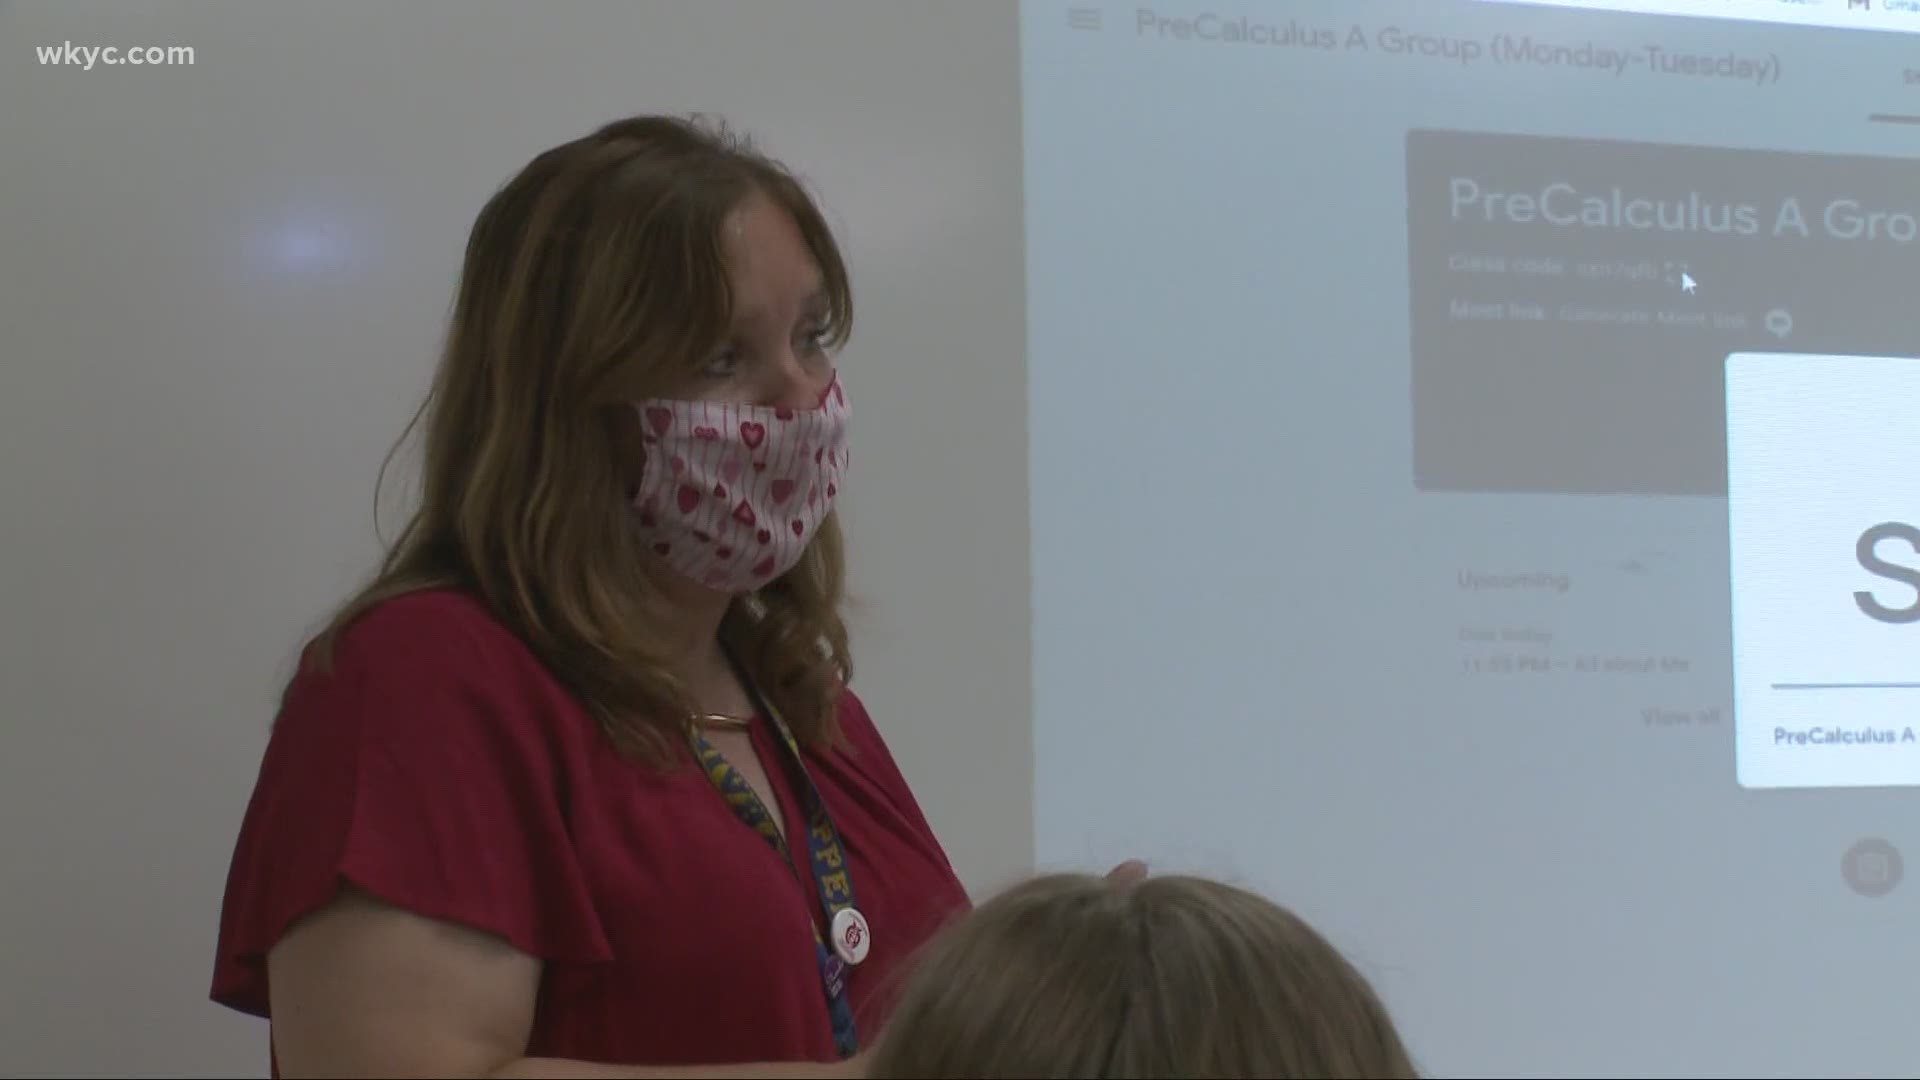 It’s the first day of school for several districts across NEO and we are getting a first-hand look at the changes during the pandemic. Tiffany Tarpley reports.